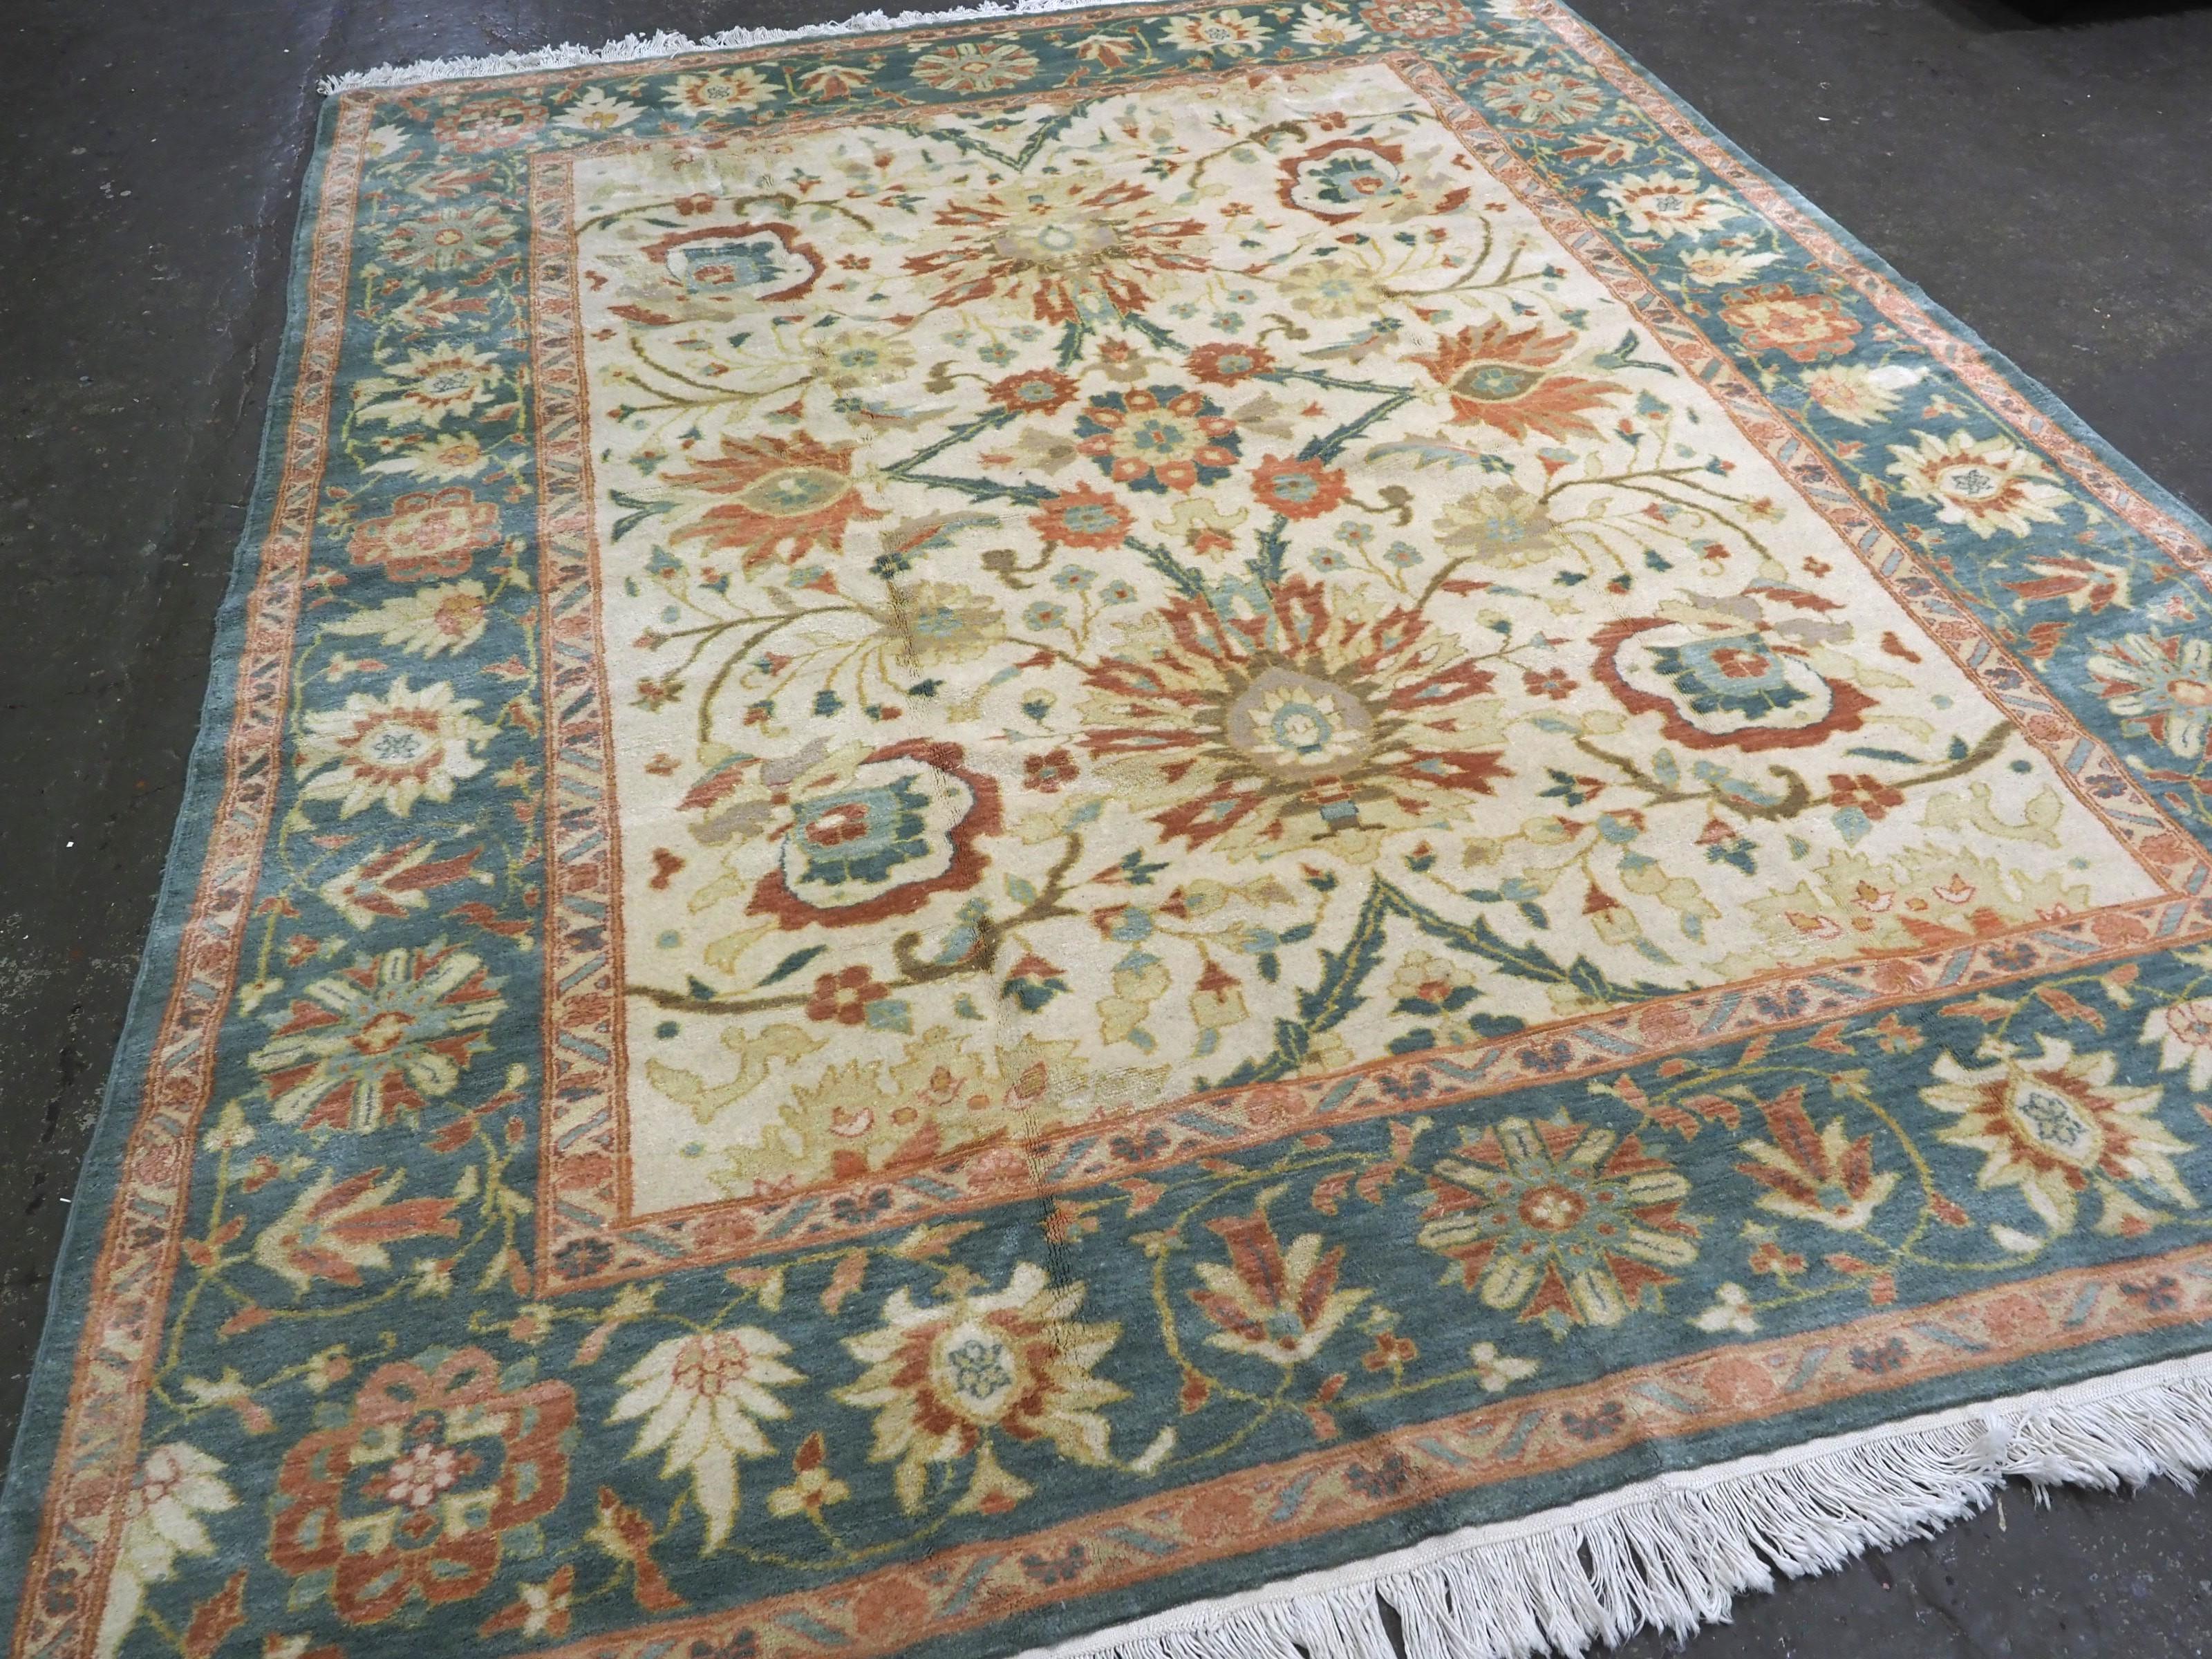 
Vintage Mahal style carpet with all over large scale design on an ivory ground.

About 40-50 years old.

The carpet is very striking with a large scale design and soft pastel colours on a cream / ivory coloured field. The carpet has the look that